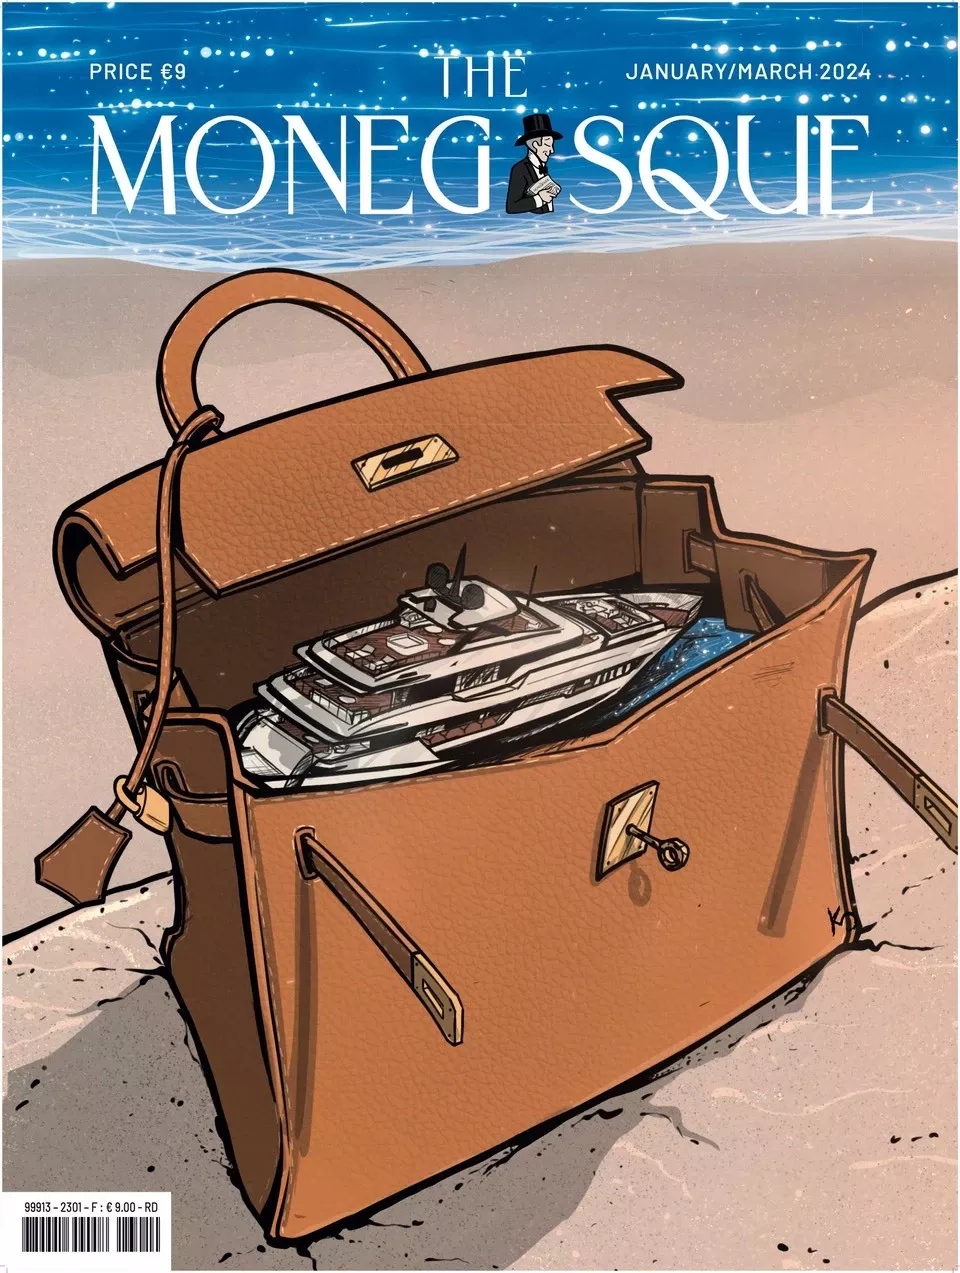 The Inaugural Issue of The Monegasque Is Out